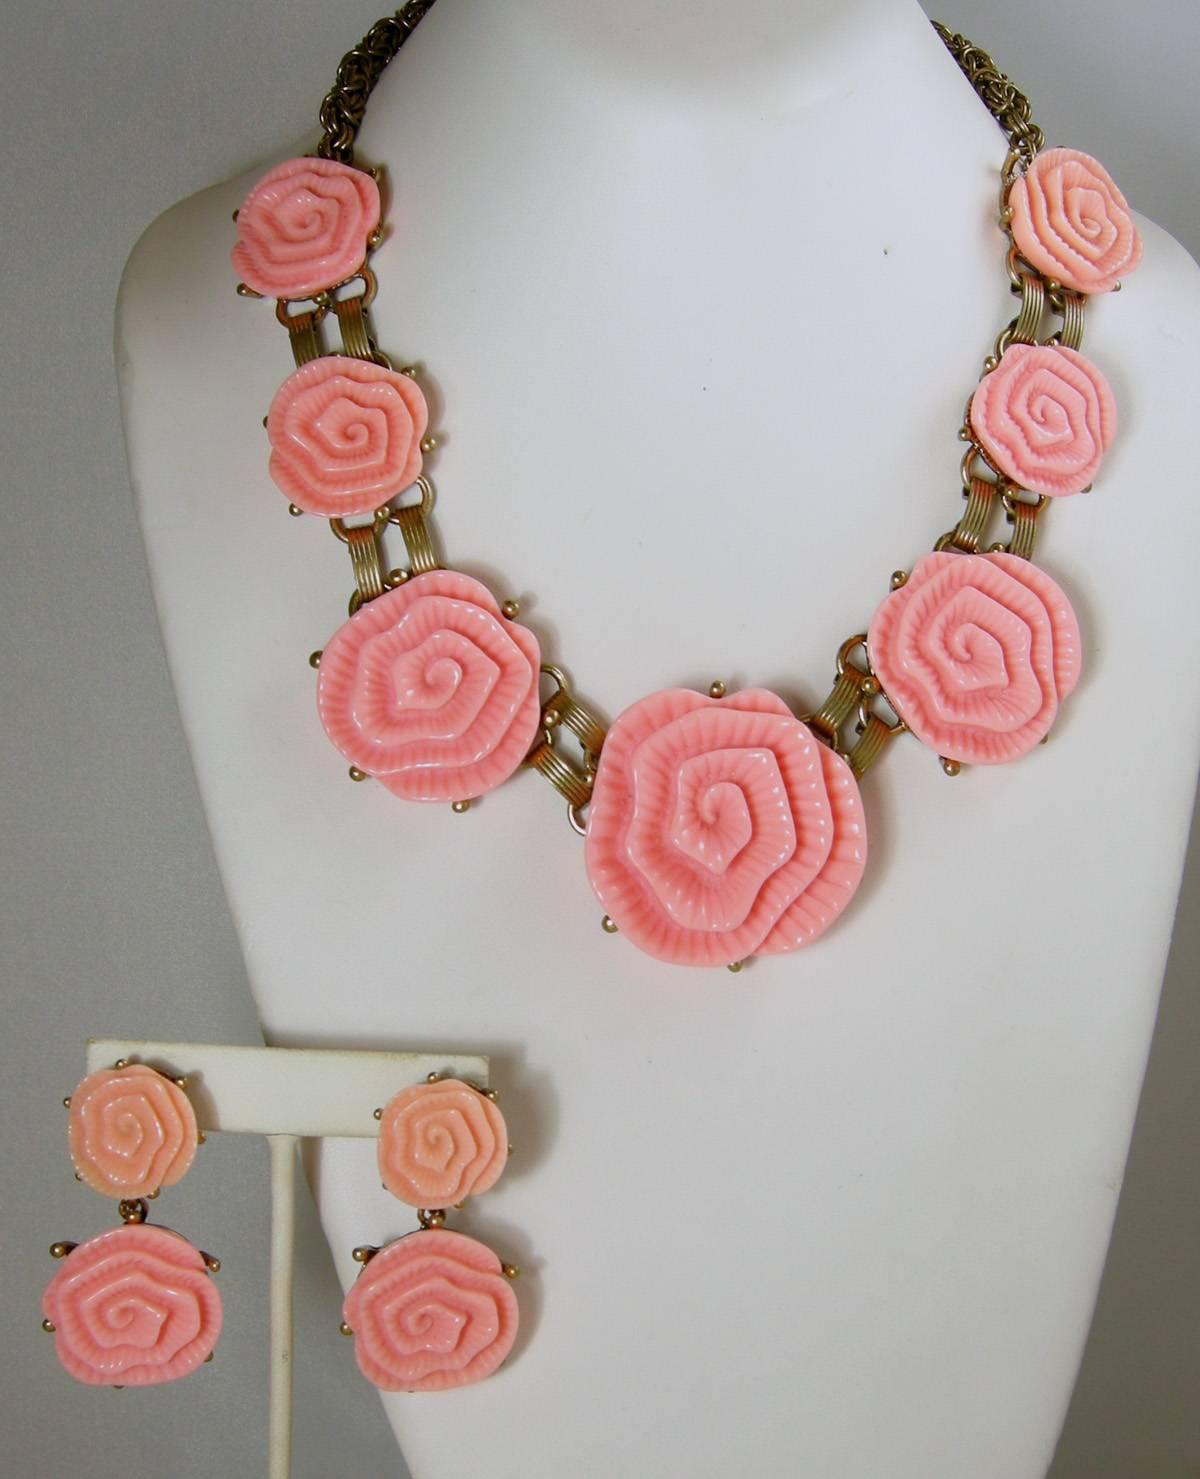 This is the perfect necklace and earrings for the summer.  It is an Oscar de la Renta pink camellia runway necklace with seven camellia flowers graduating in size to the middle.  All the flowers are carved resin connected to a book chain back in an